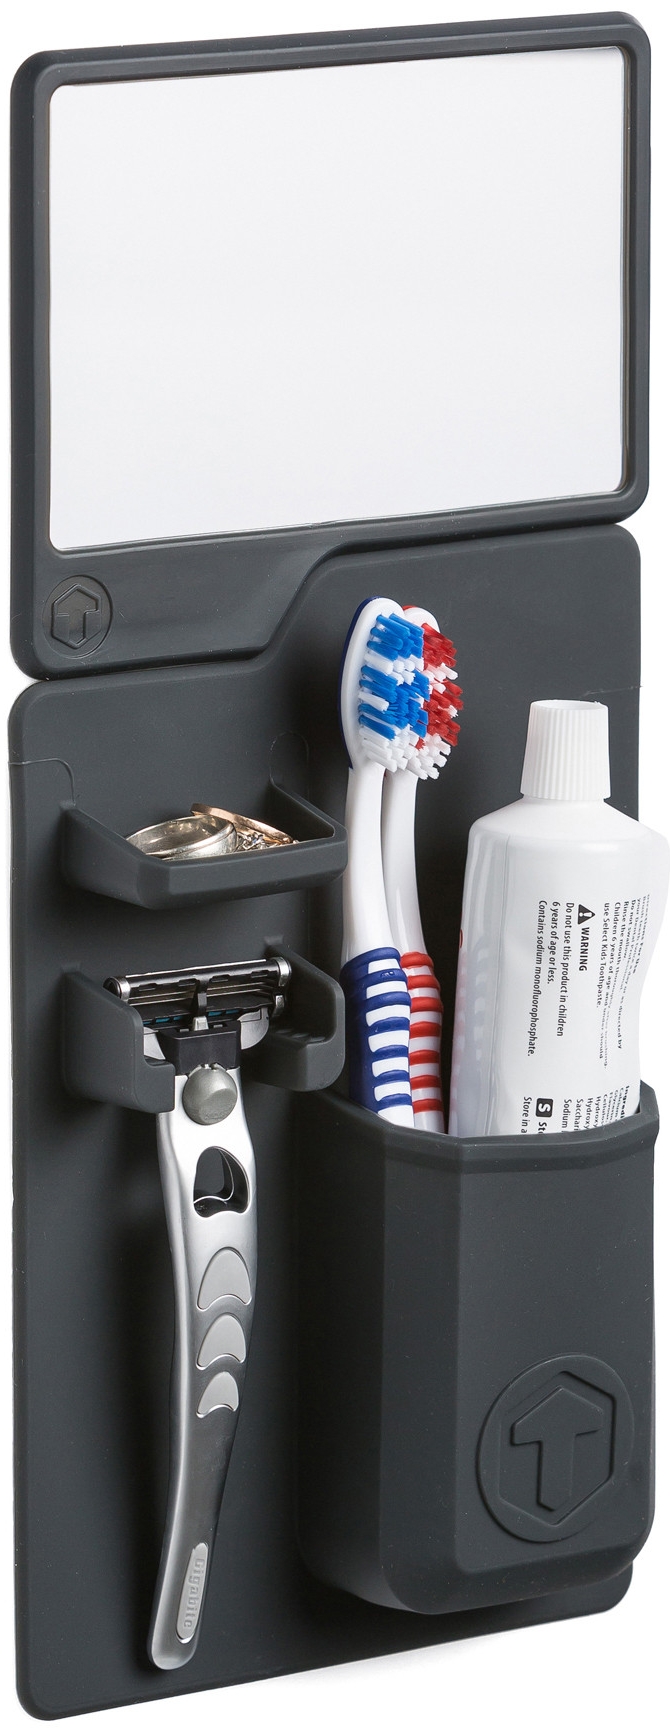 Tooletries Mighty Toothbrush Holder, $17.99